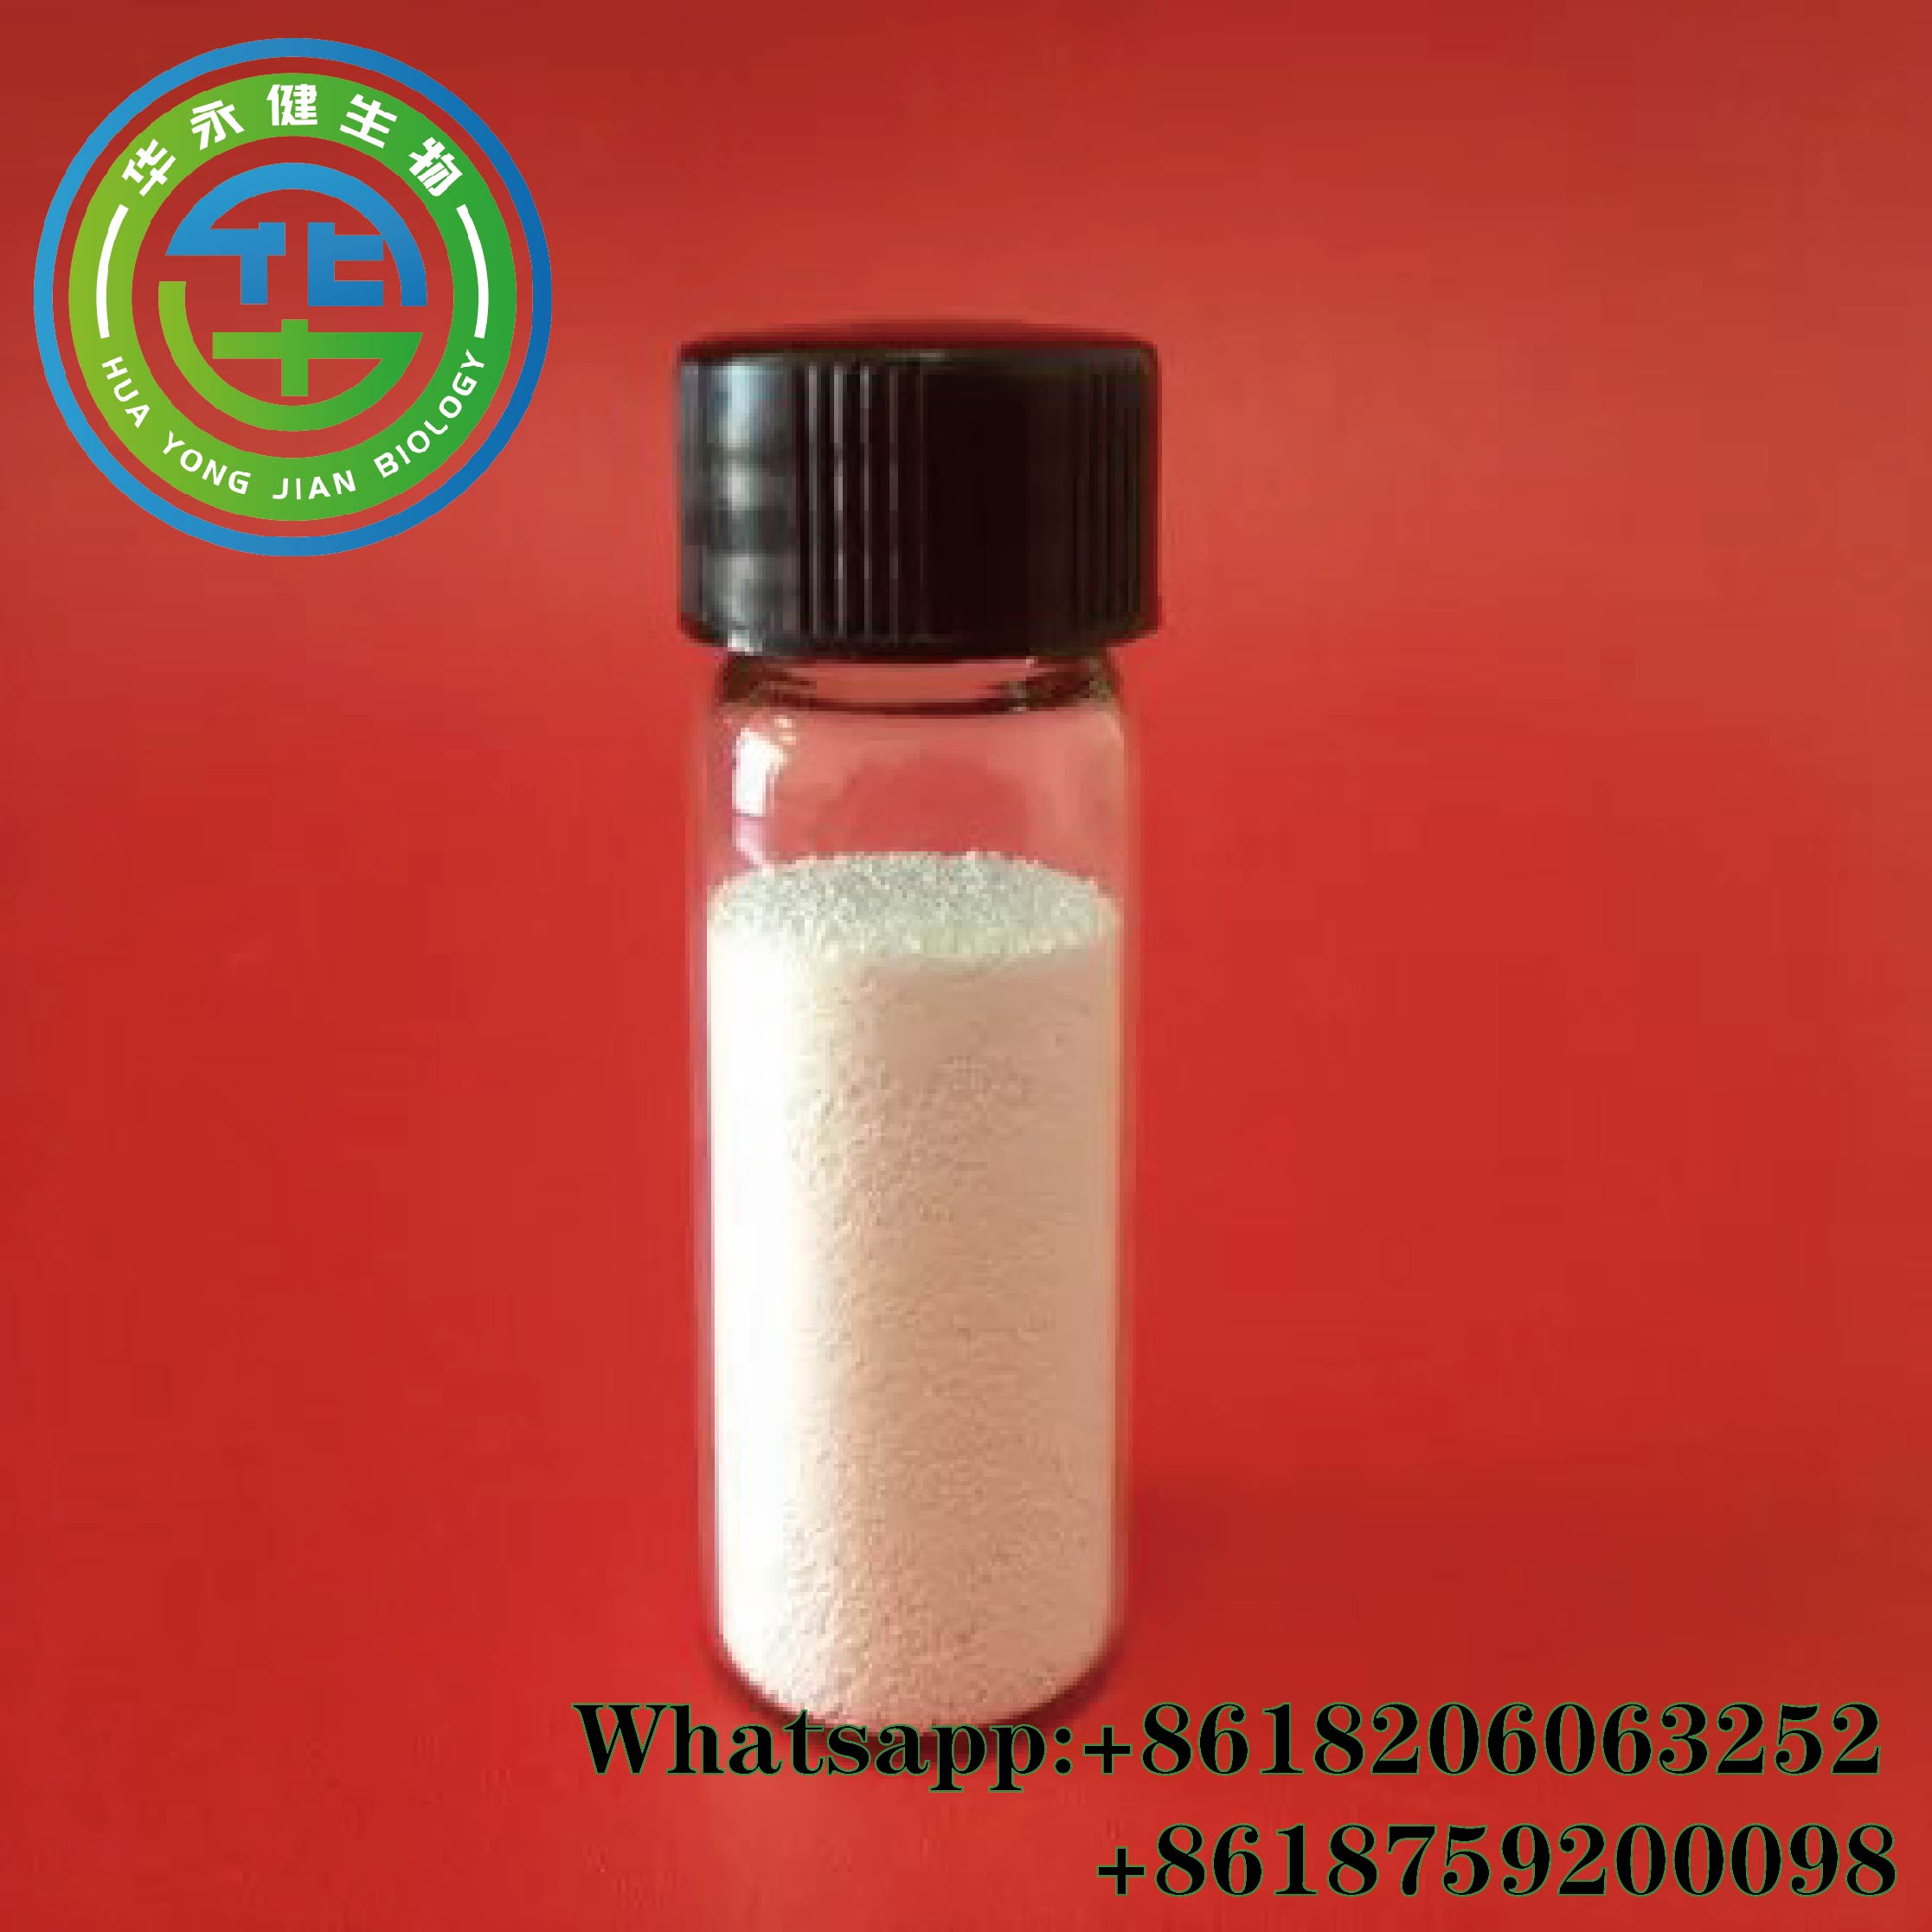 Testosterone Undecanoate High Purity Test UndecanoateSafe white Powder CAS: 5949-44-0 for Musclebuilding